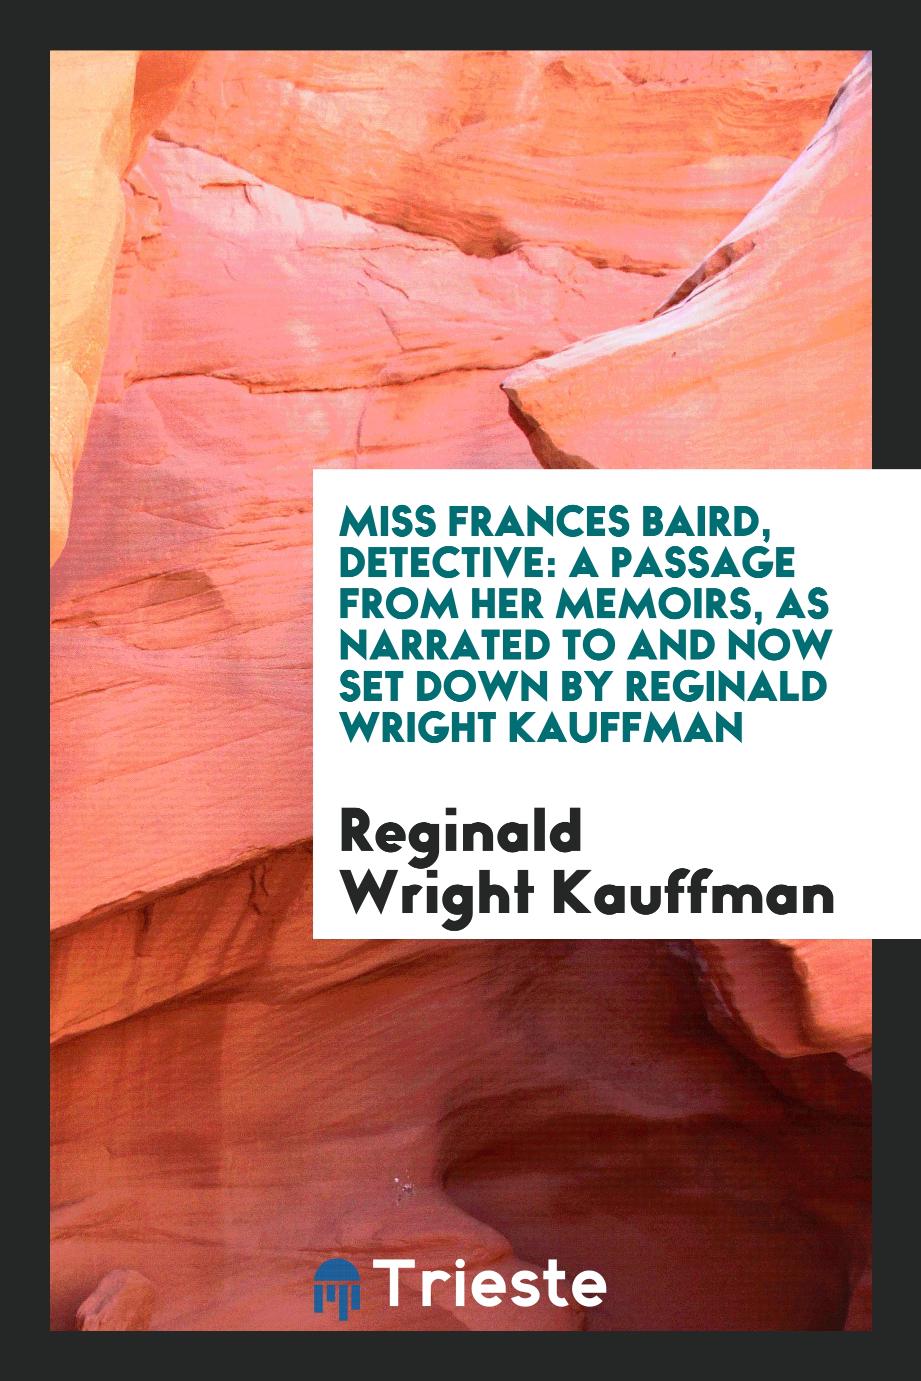 Miss Frances Baird, Detective: A Passage from Her Memoirs, as Narrated to and Now Set Down by Reginald Wright Kauffman